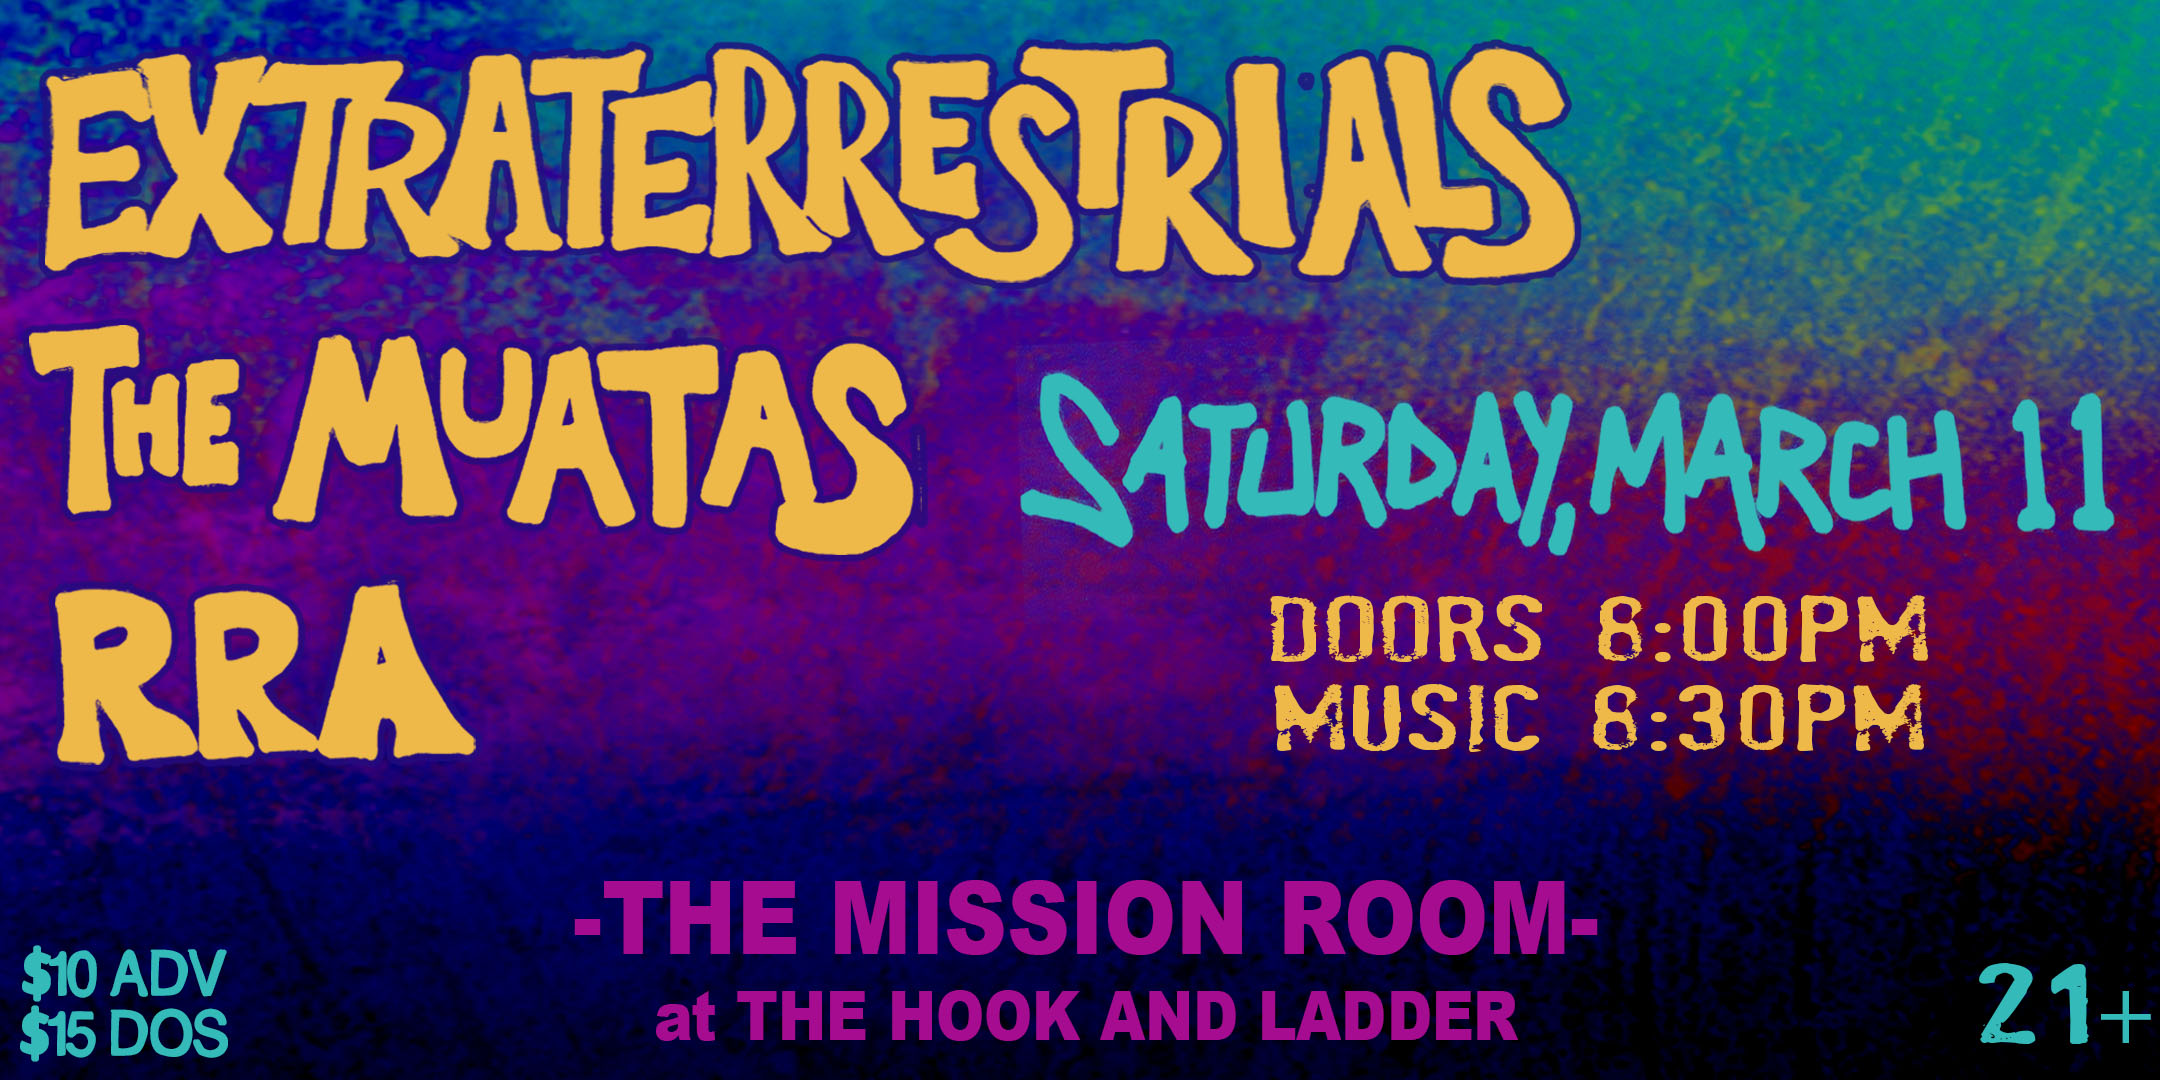 Extraterrestrials The Muatas RRA Saturday March 11 The Mission Room at The Hook and Ladder Theater Doors 8:00pm :: Music 8:30pm :: 21+ General Admission $10 ADV / $15 DOS NO REFUNDS